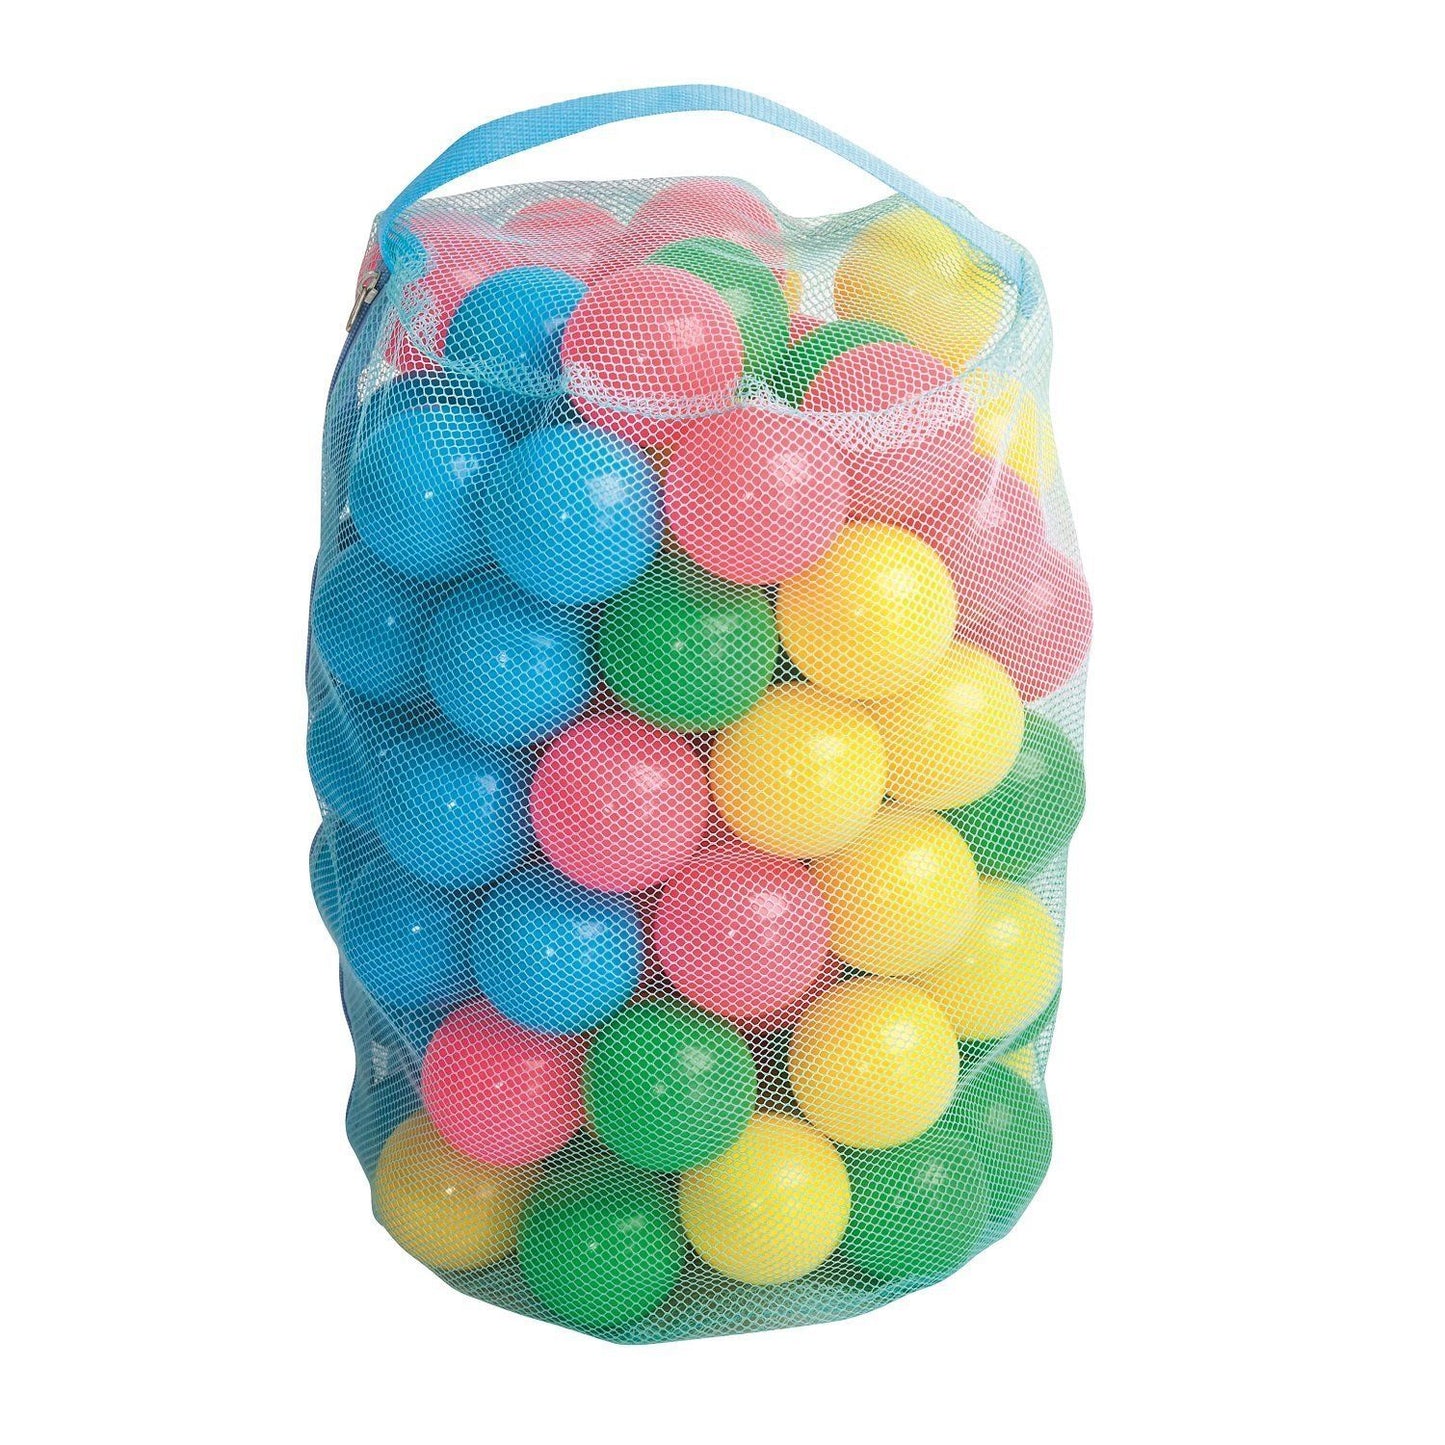 Bestway 50 Fun Colored Balls for Inflatable Jump O Lene Bouncer Ball Pits